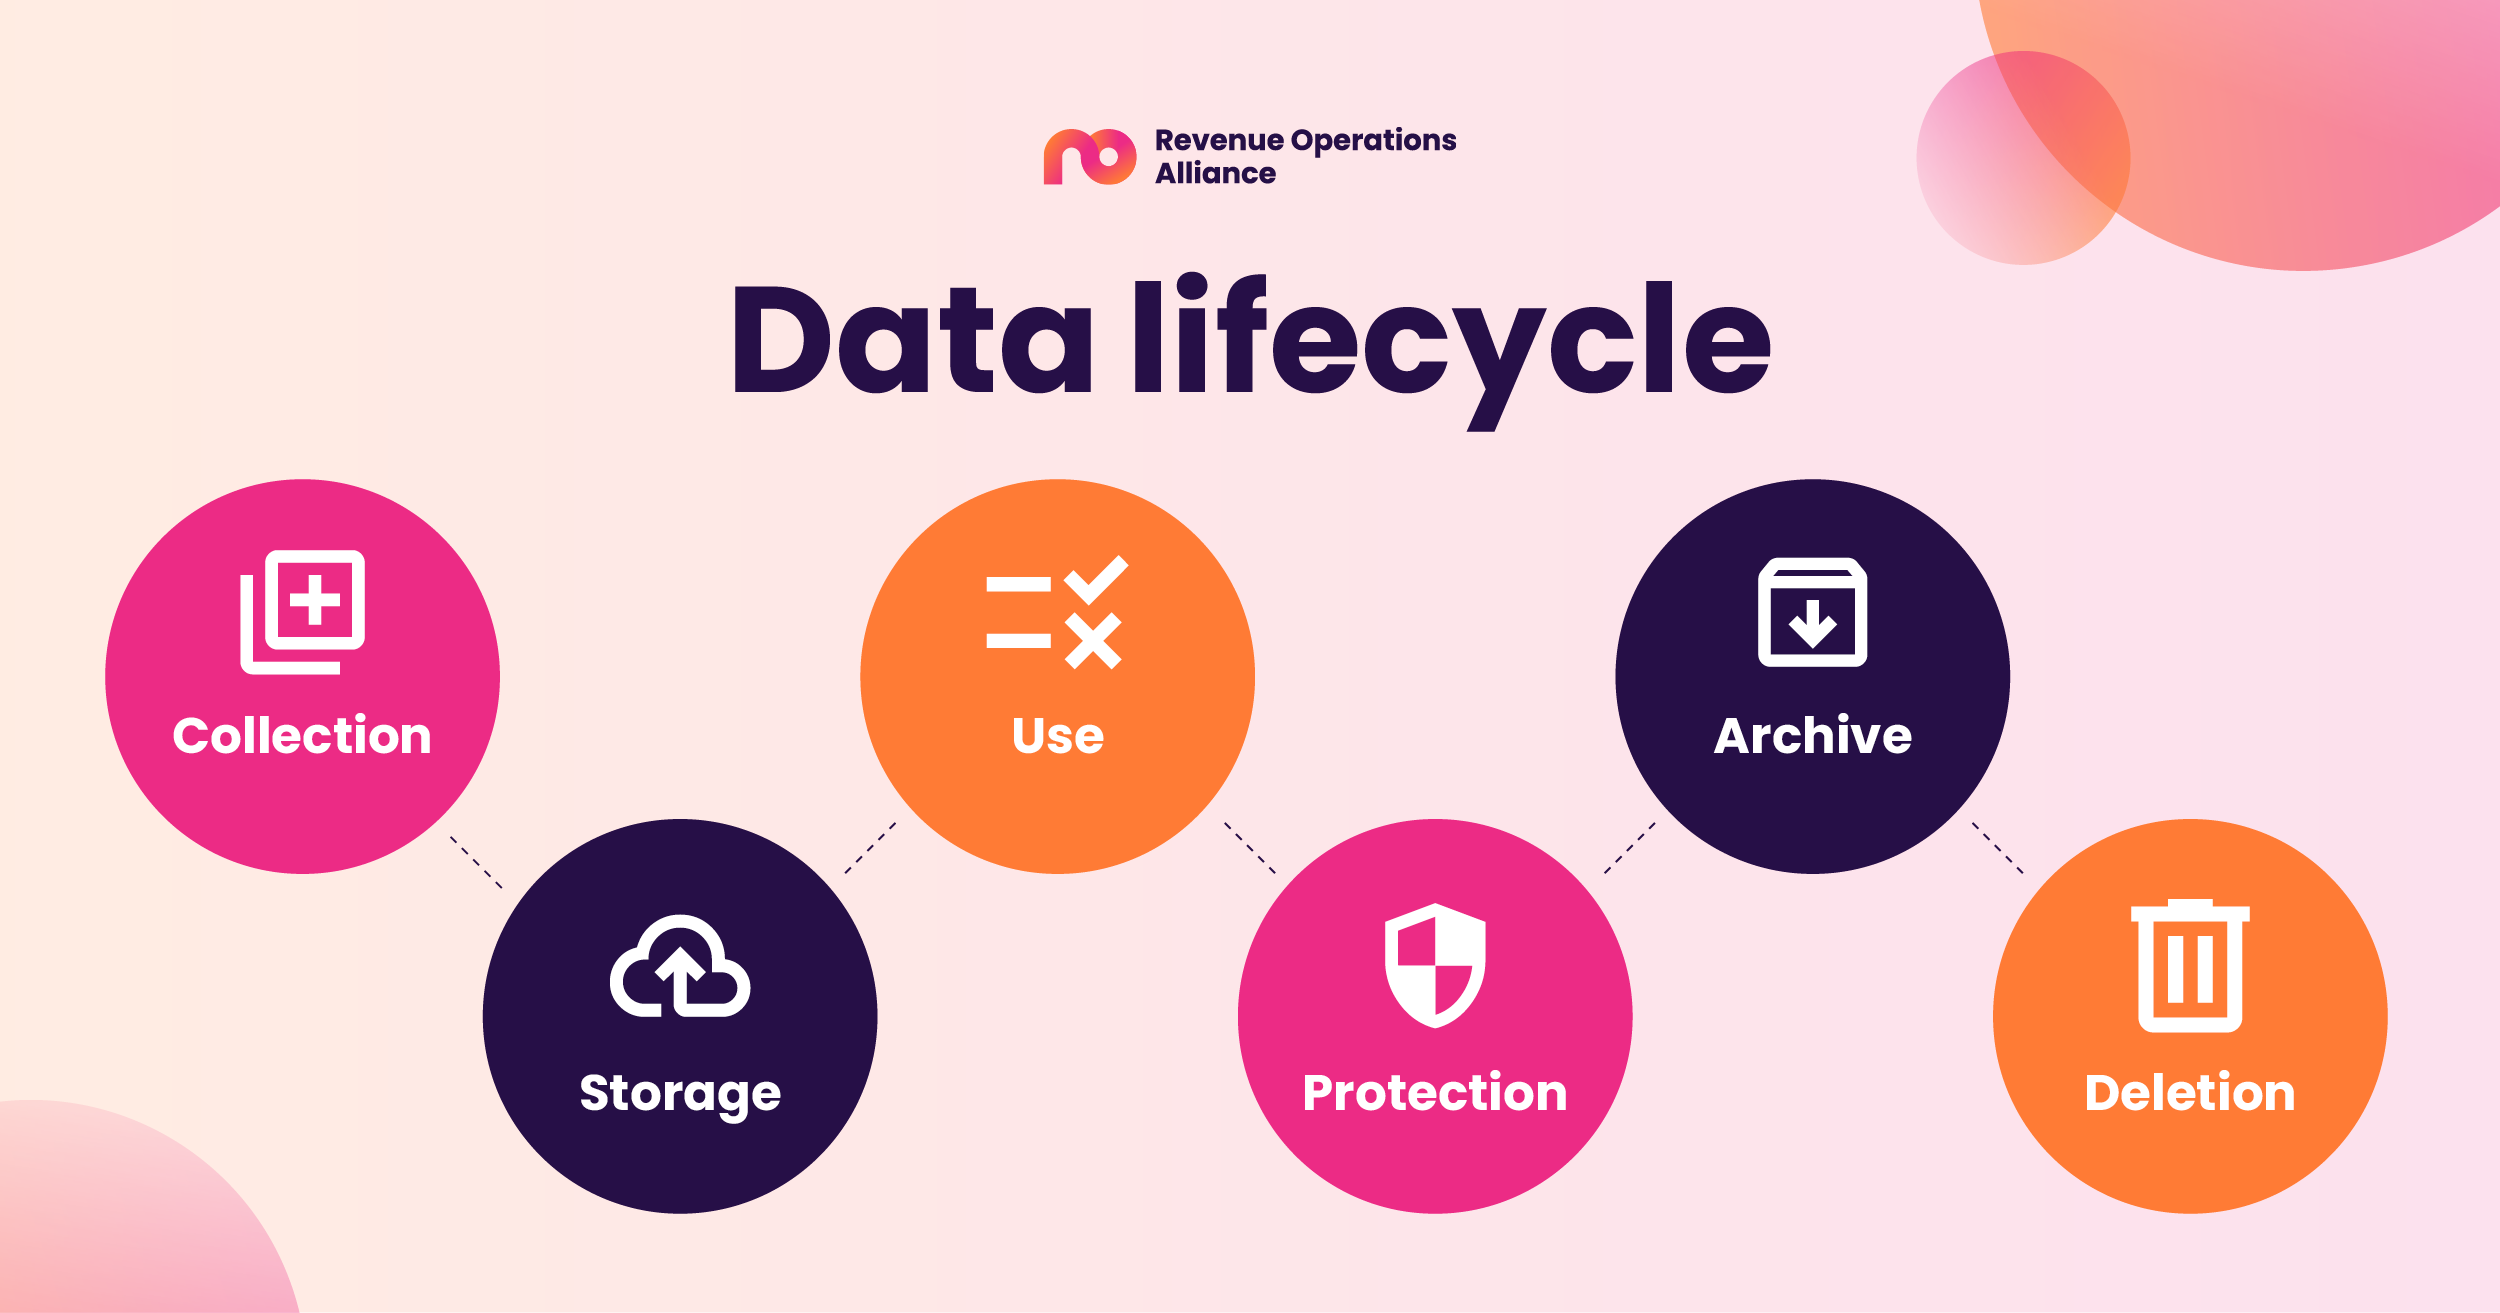 data lifecycle: collection, storage, use, protection, archive, deletion